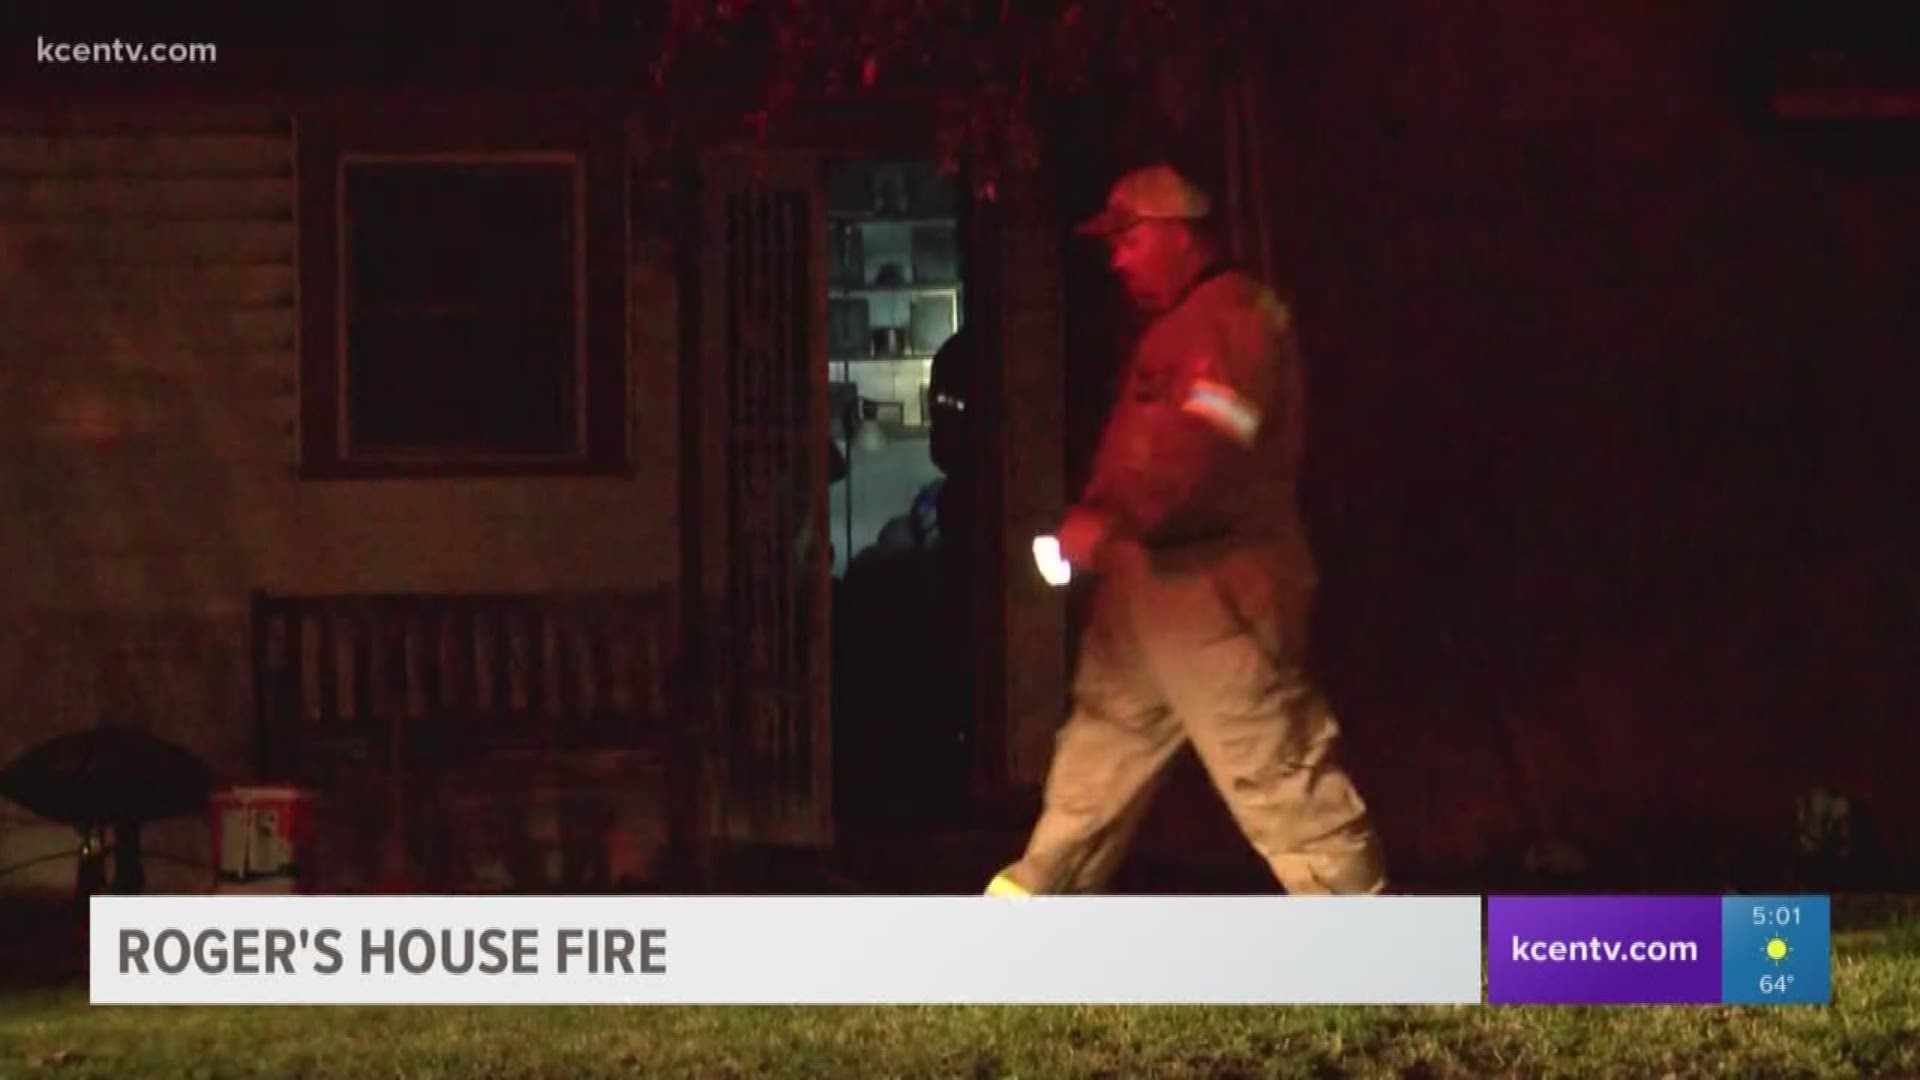 The Bell County Fire Marshal is investigating the cause of a house fire in Rogers Thursday morning.